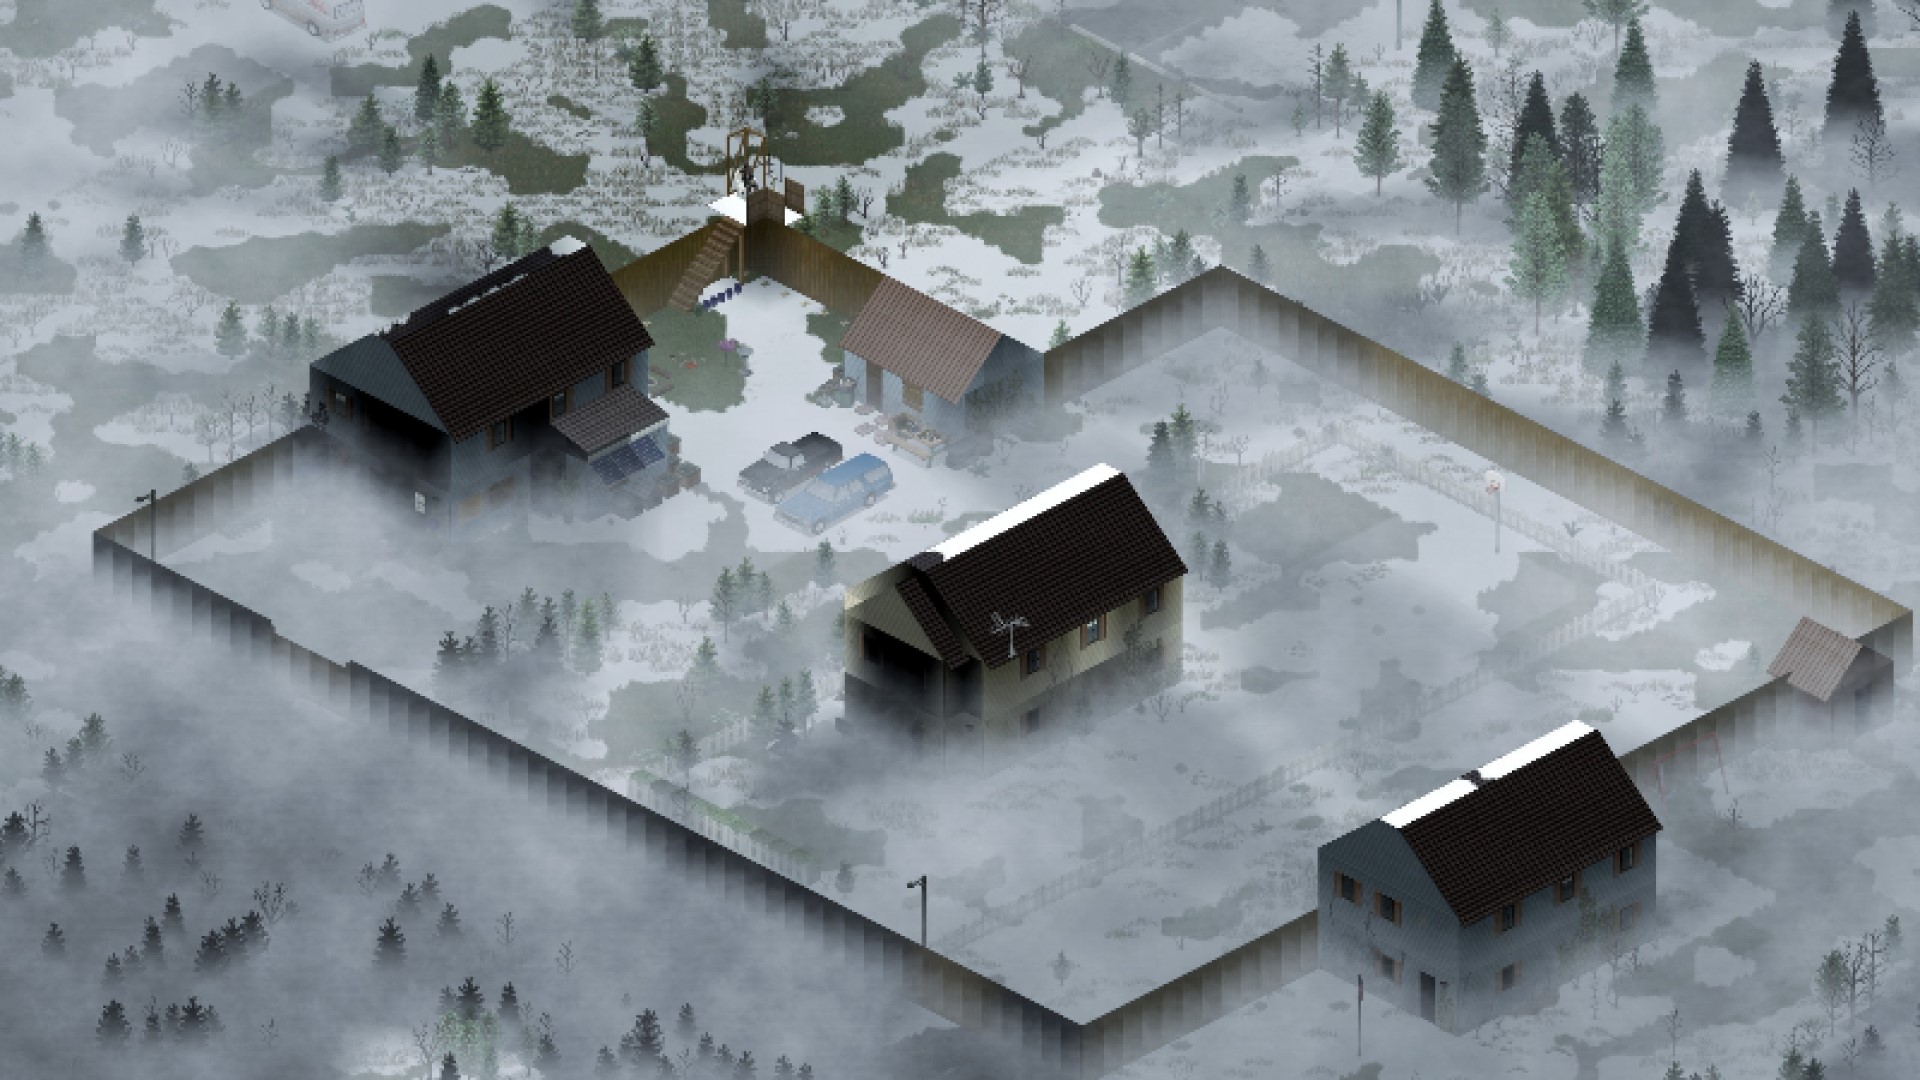 Project Zomboid - Build 41 - Released! - Project Zomboid